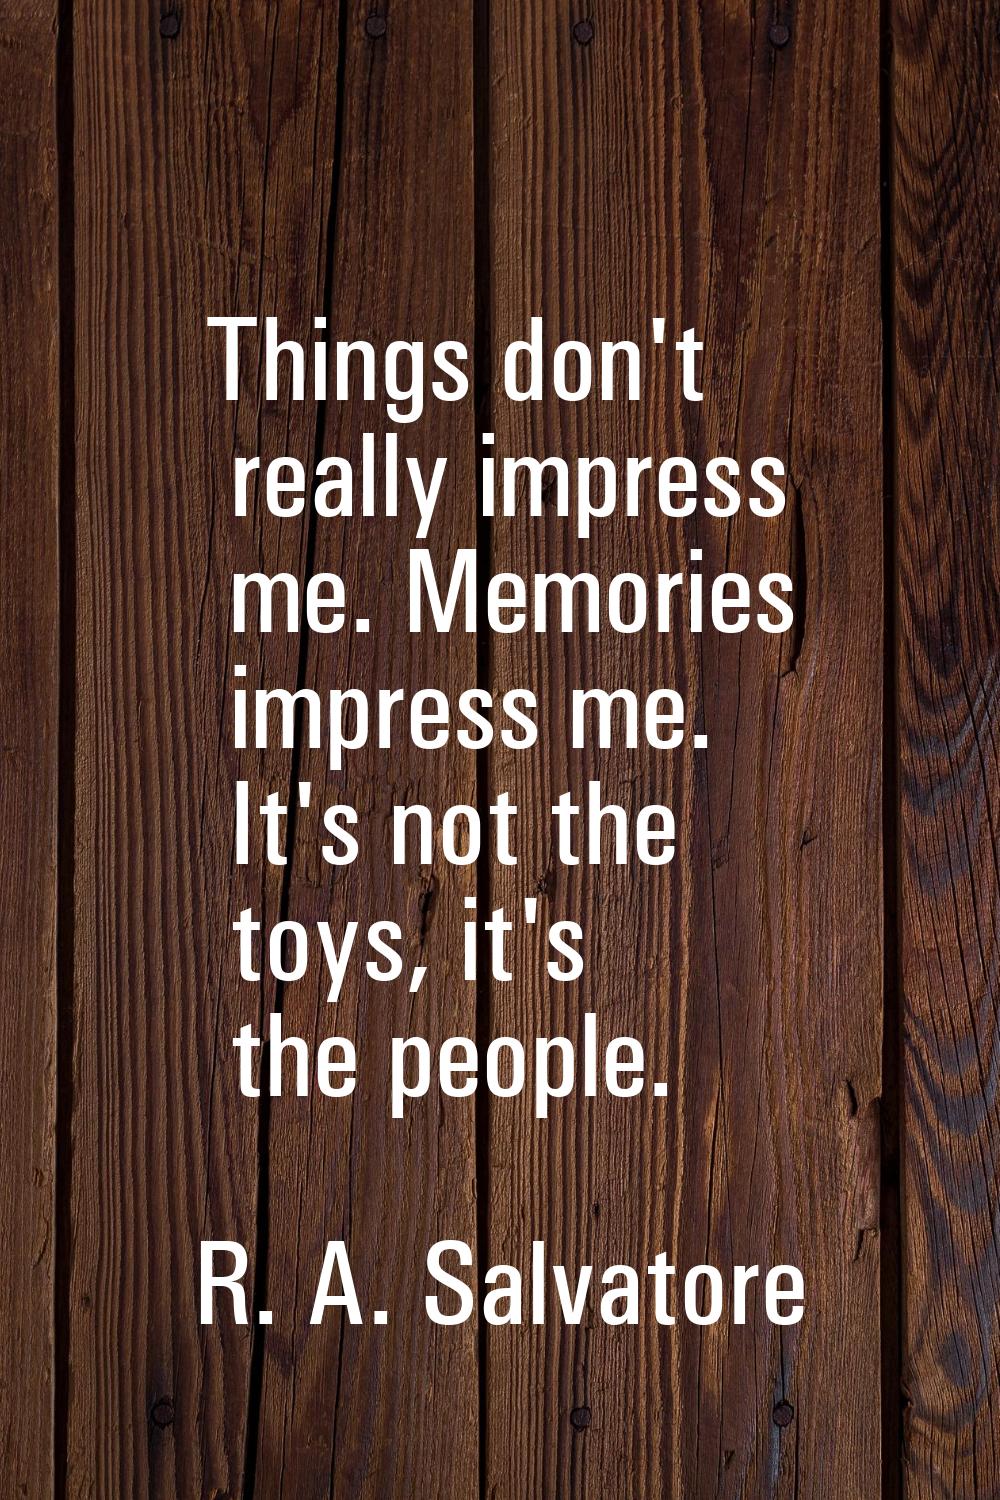 Things don't really impress me. Memories impress me. It's not the toys, it's the people.